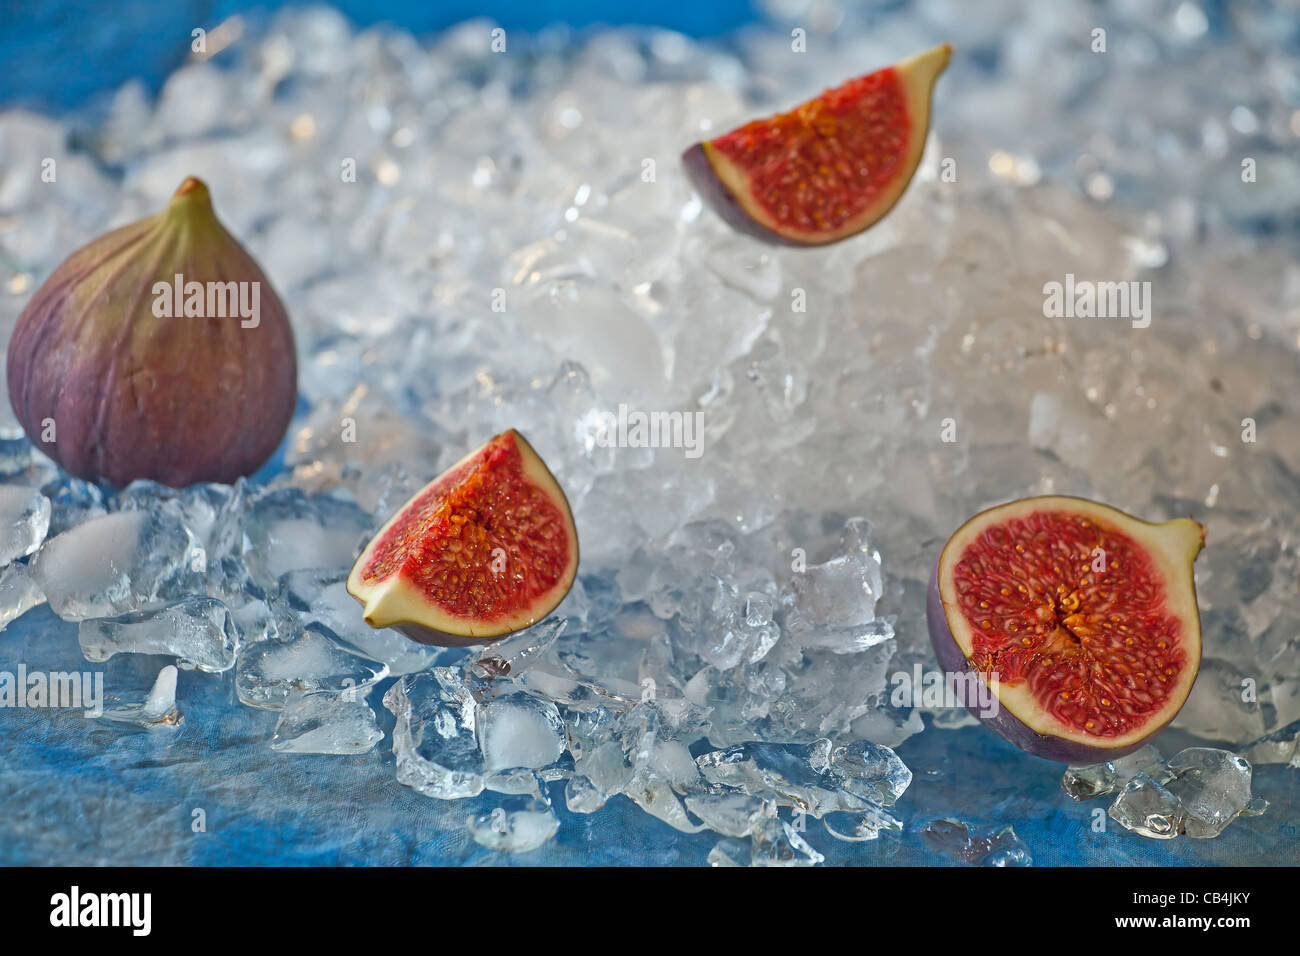 a whole figs and a cut fig on crushed ice Stock Photo